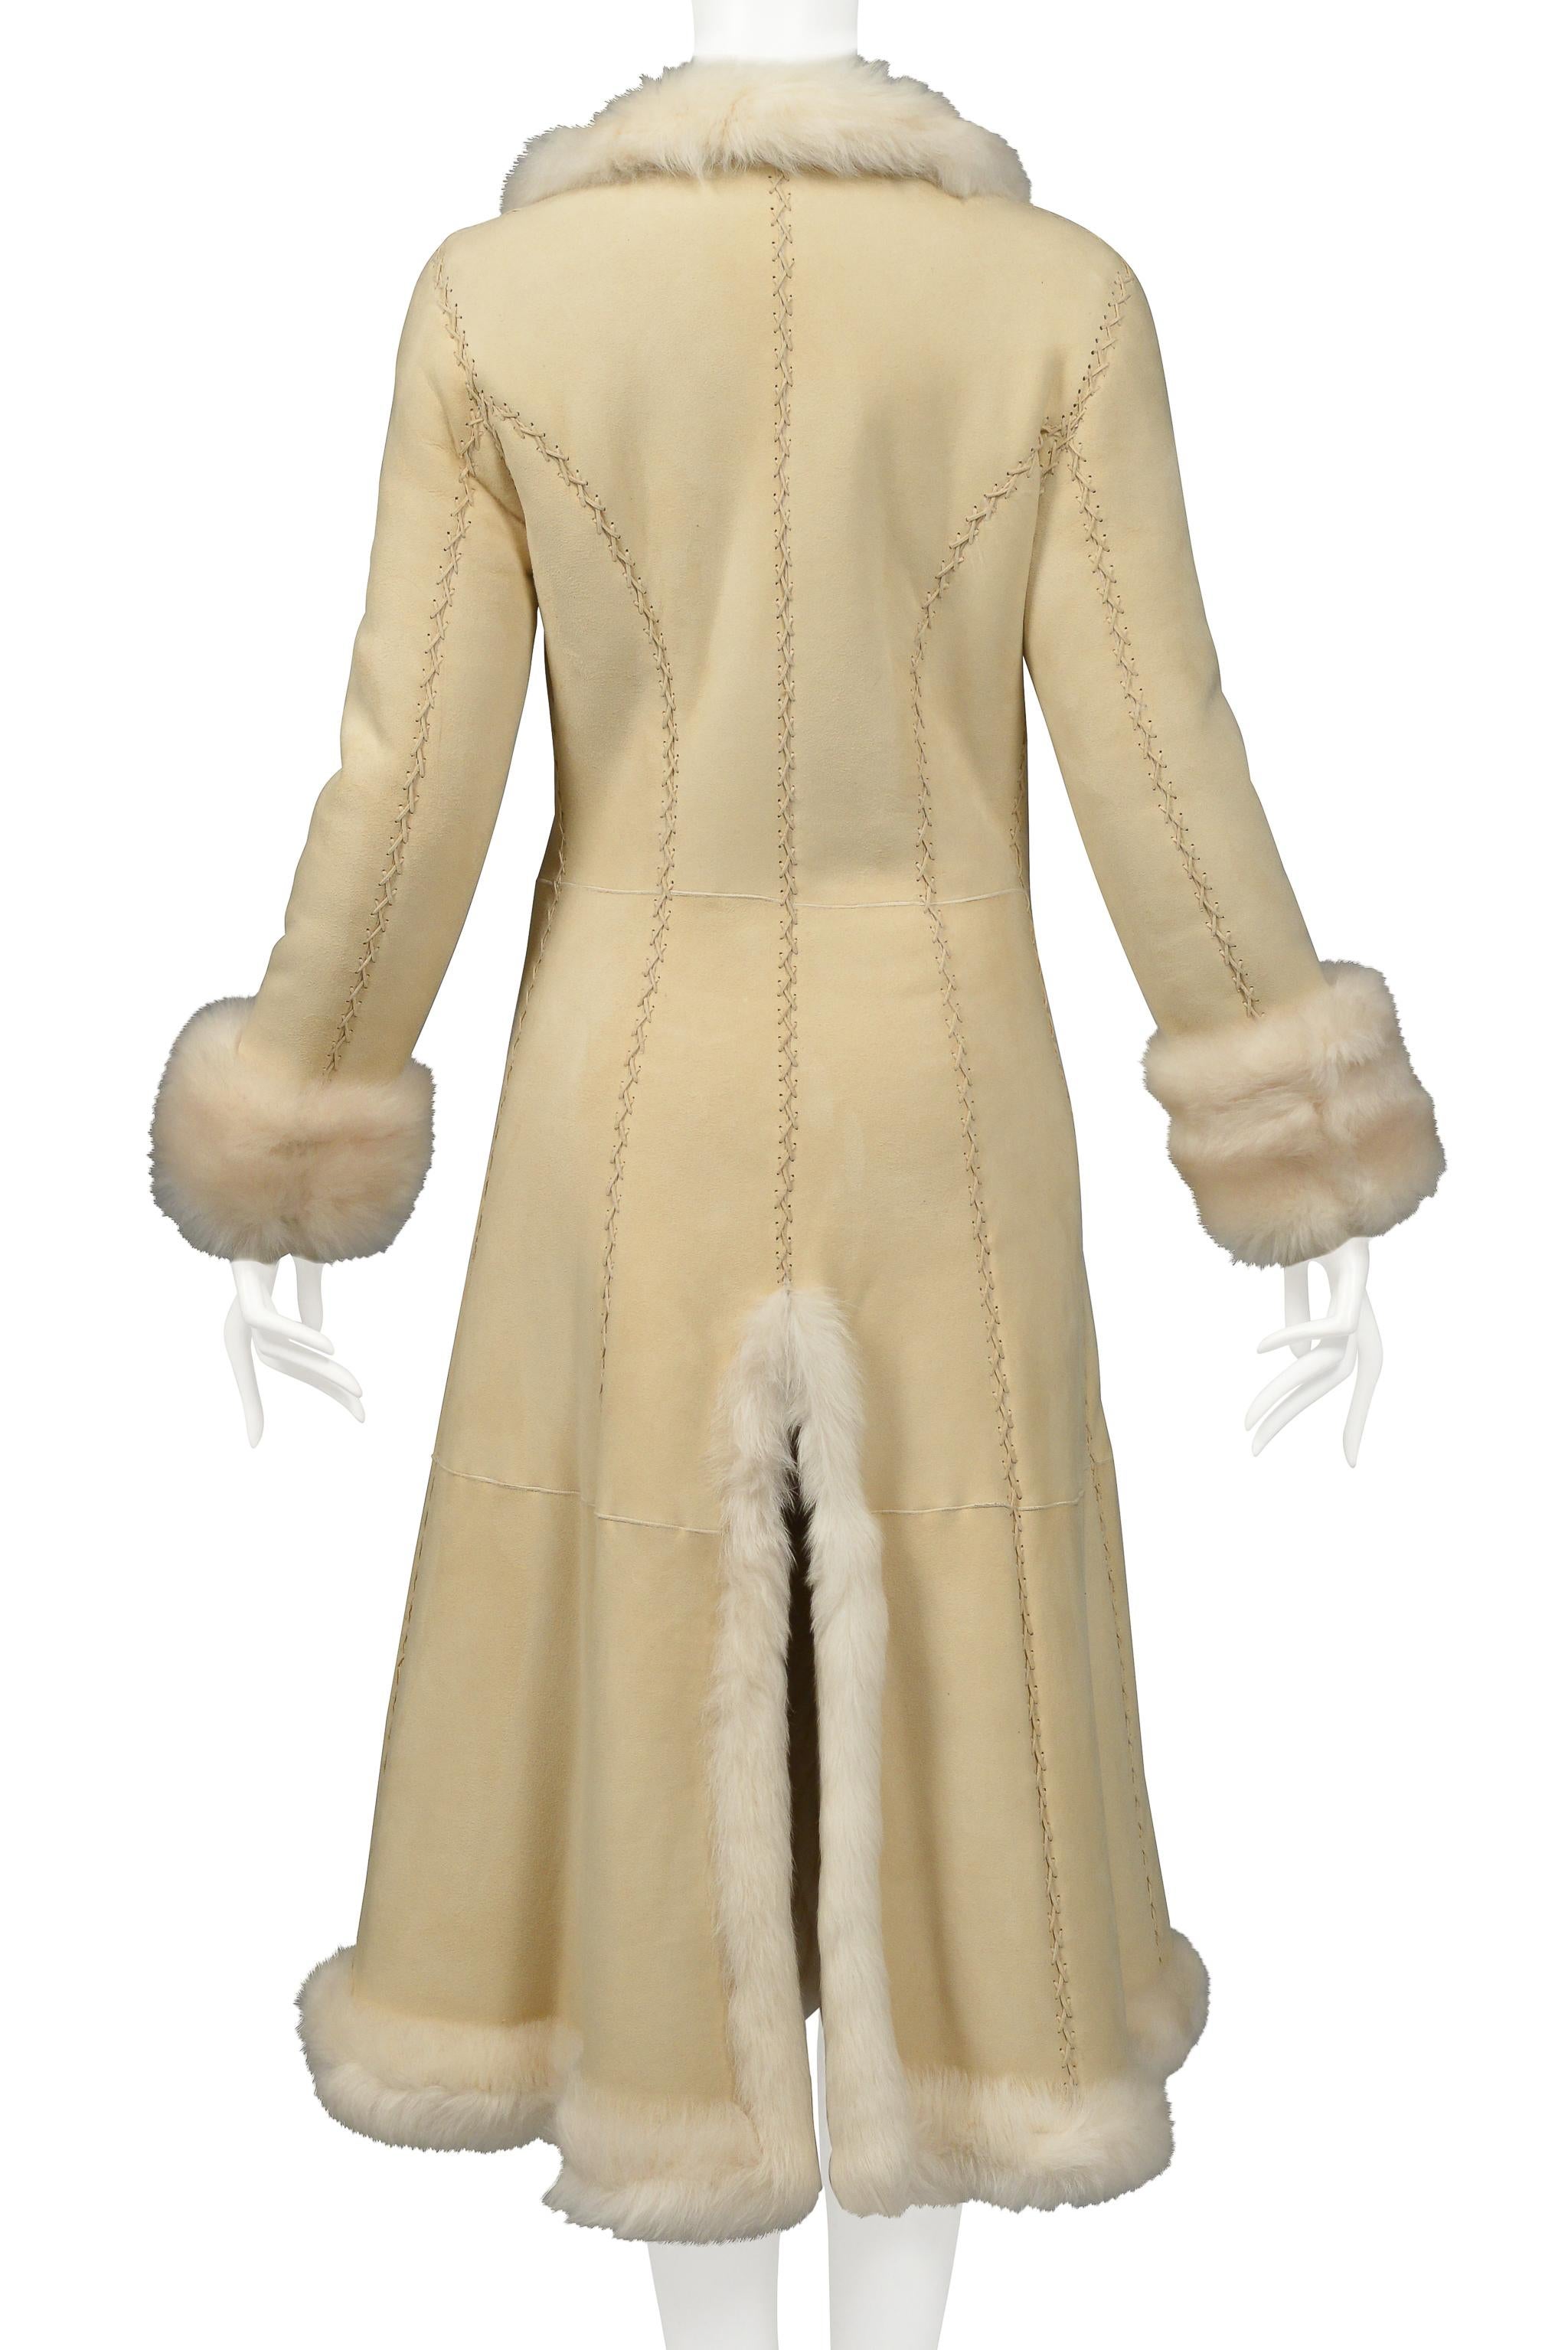 Iconic Alexander Mcqueen Off-White Suede Coat With Luxe Shearling Interior 4